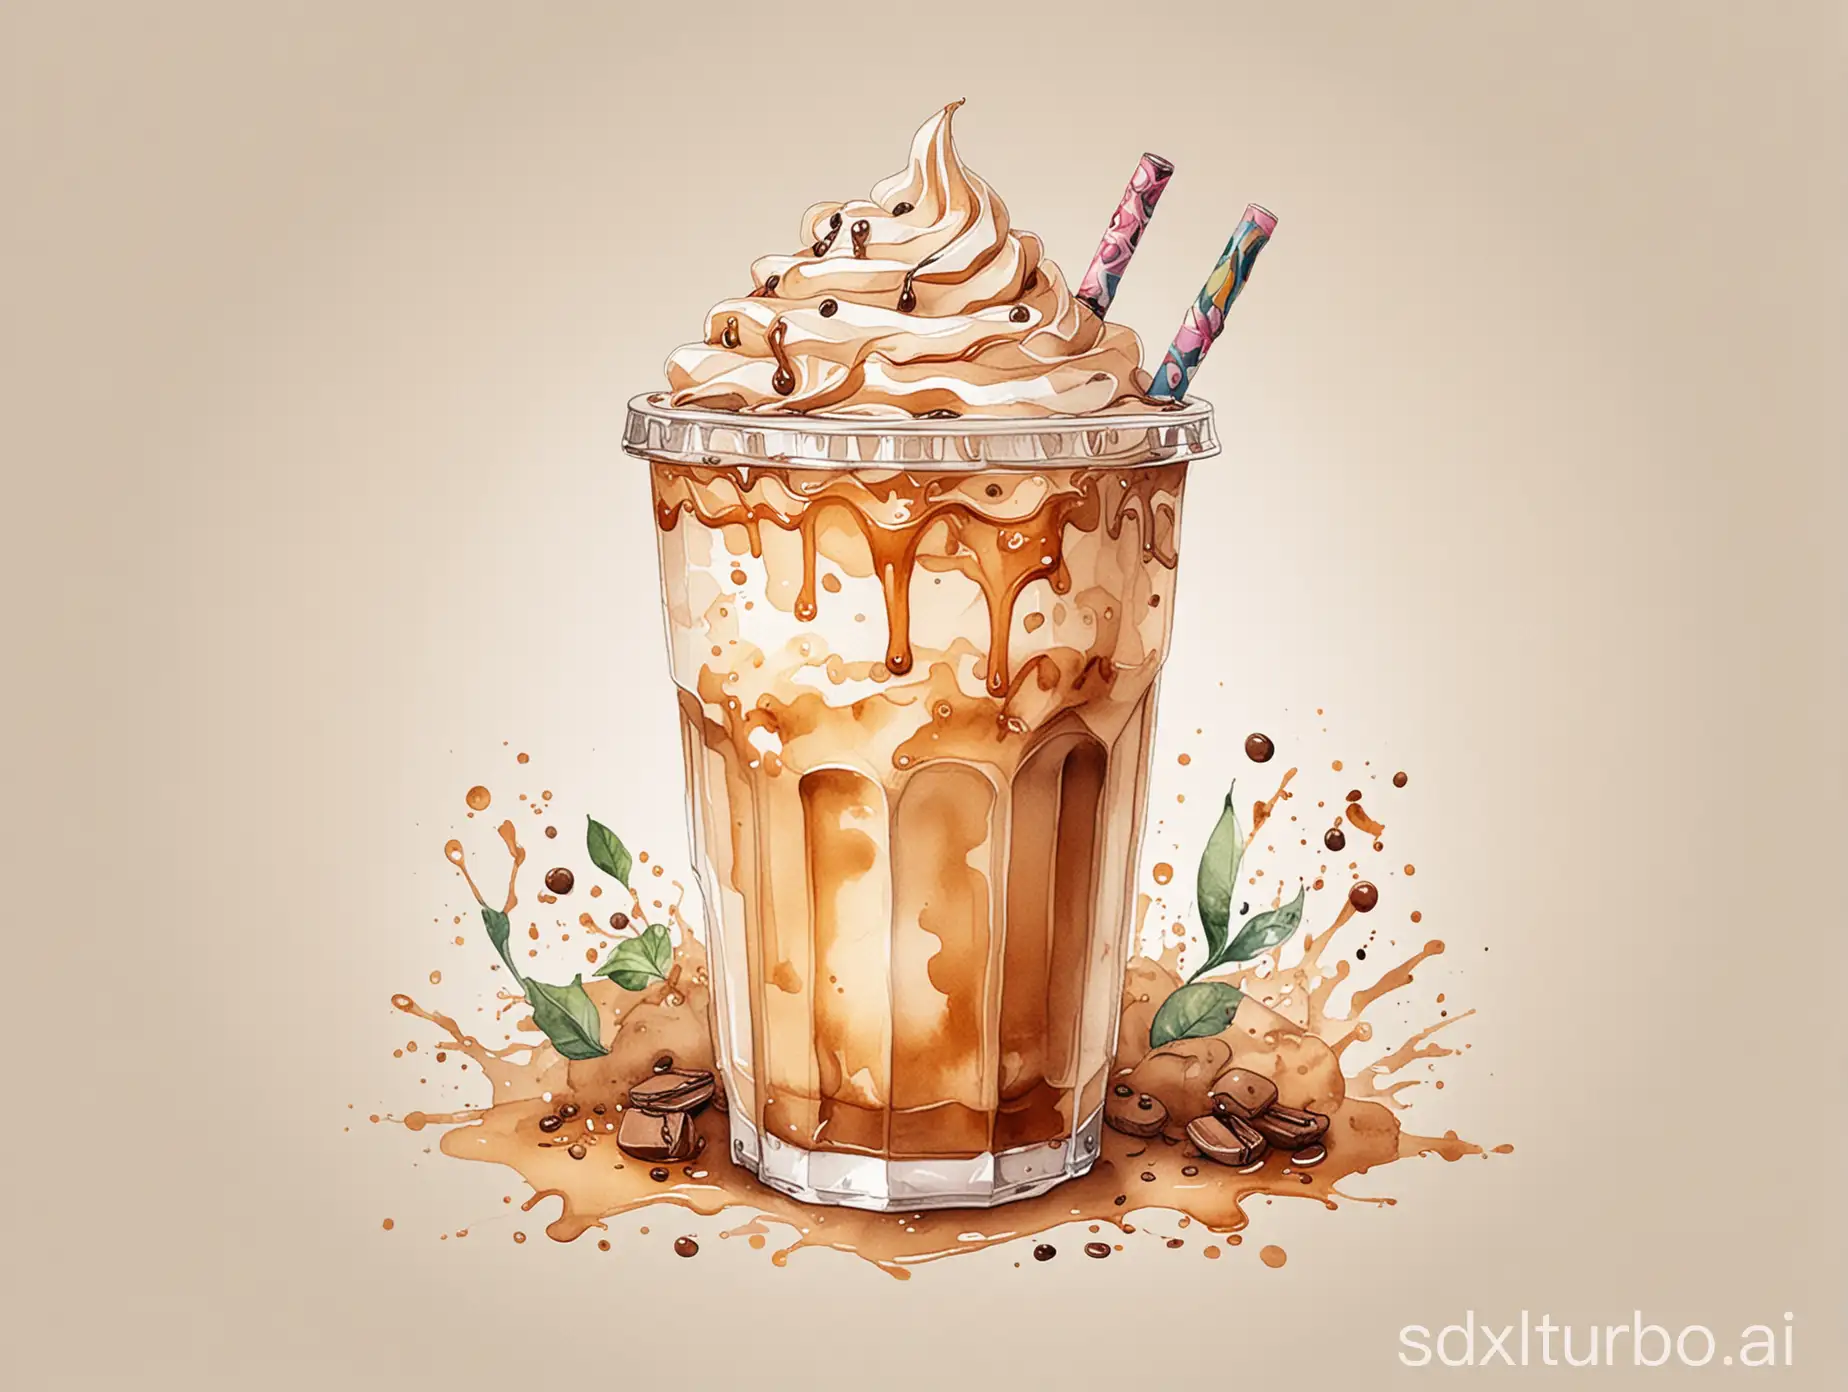 watercolor aesthetic, vector illustration, iced coffee with a whimsical design, white background --s 250 --niji 6

An illustrated image featuring a tantalizing tall glass of iced coffee, filled with shiny ice cubes, a straw, and a playful shadow, evoking a sense of refreshment.
